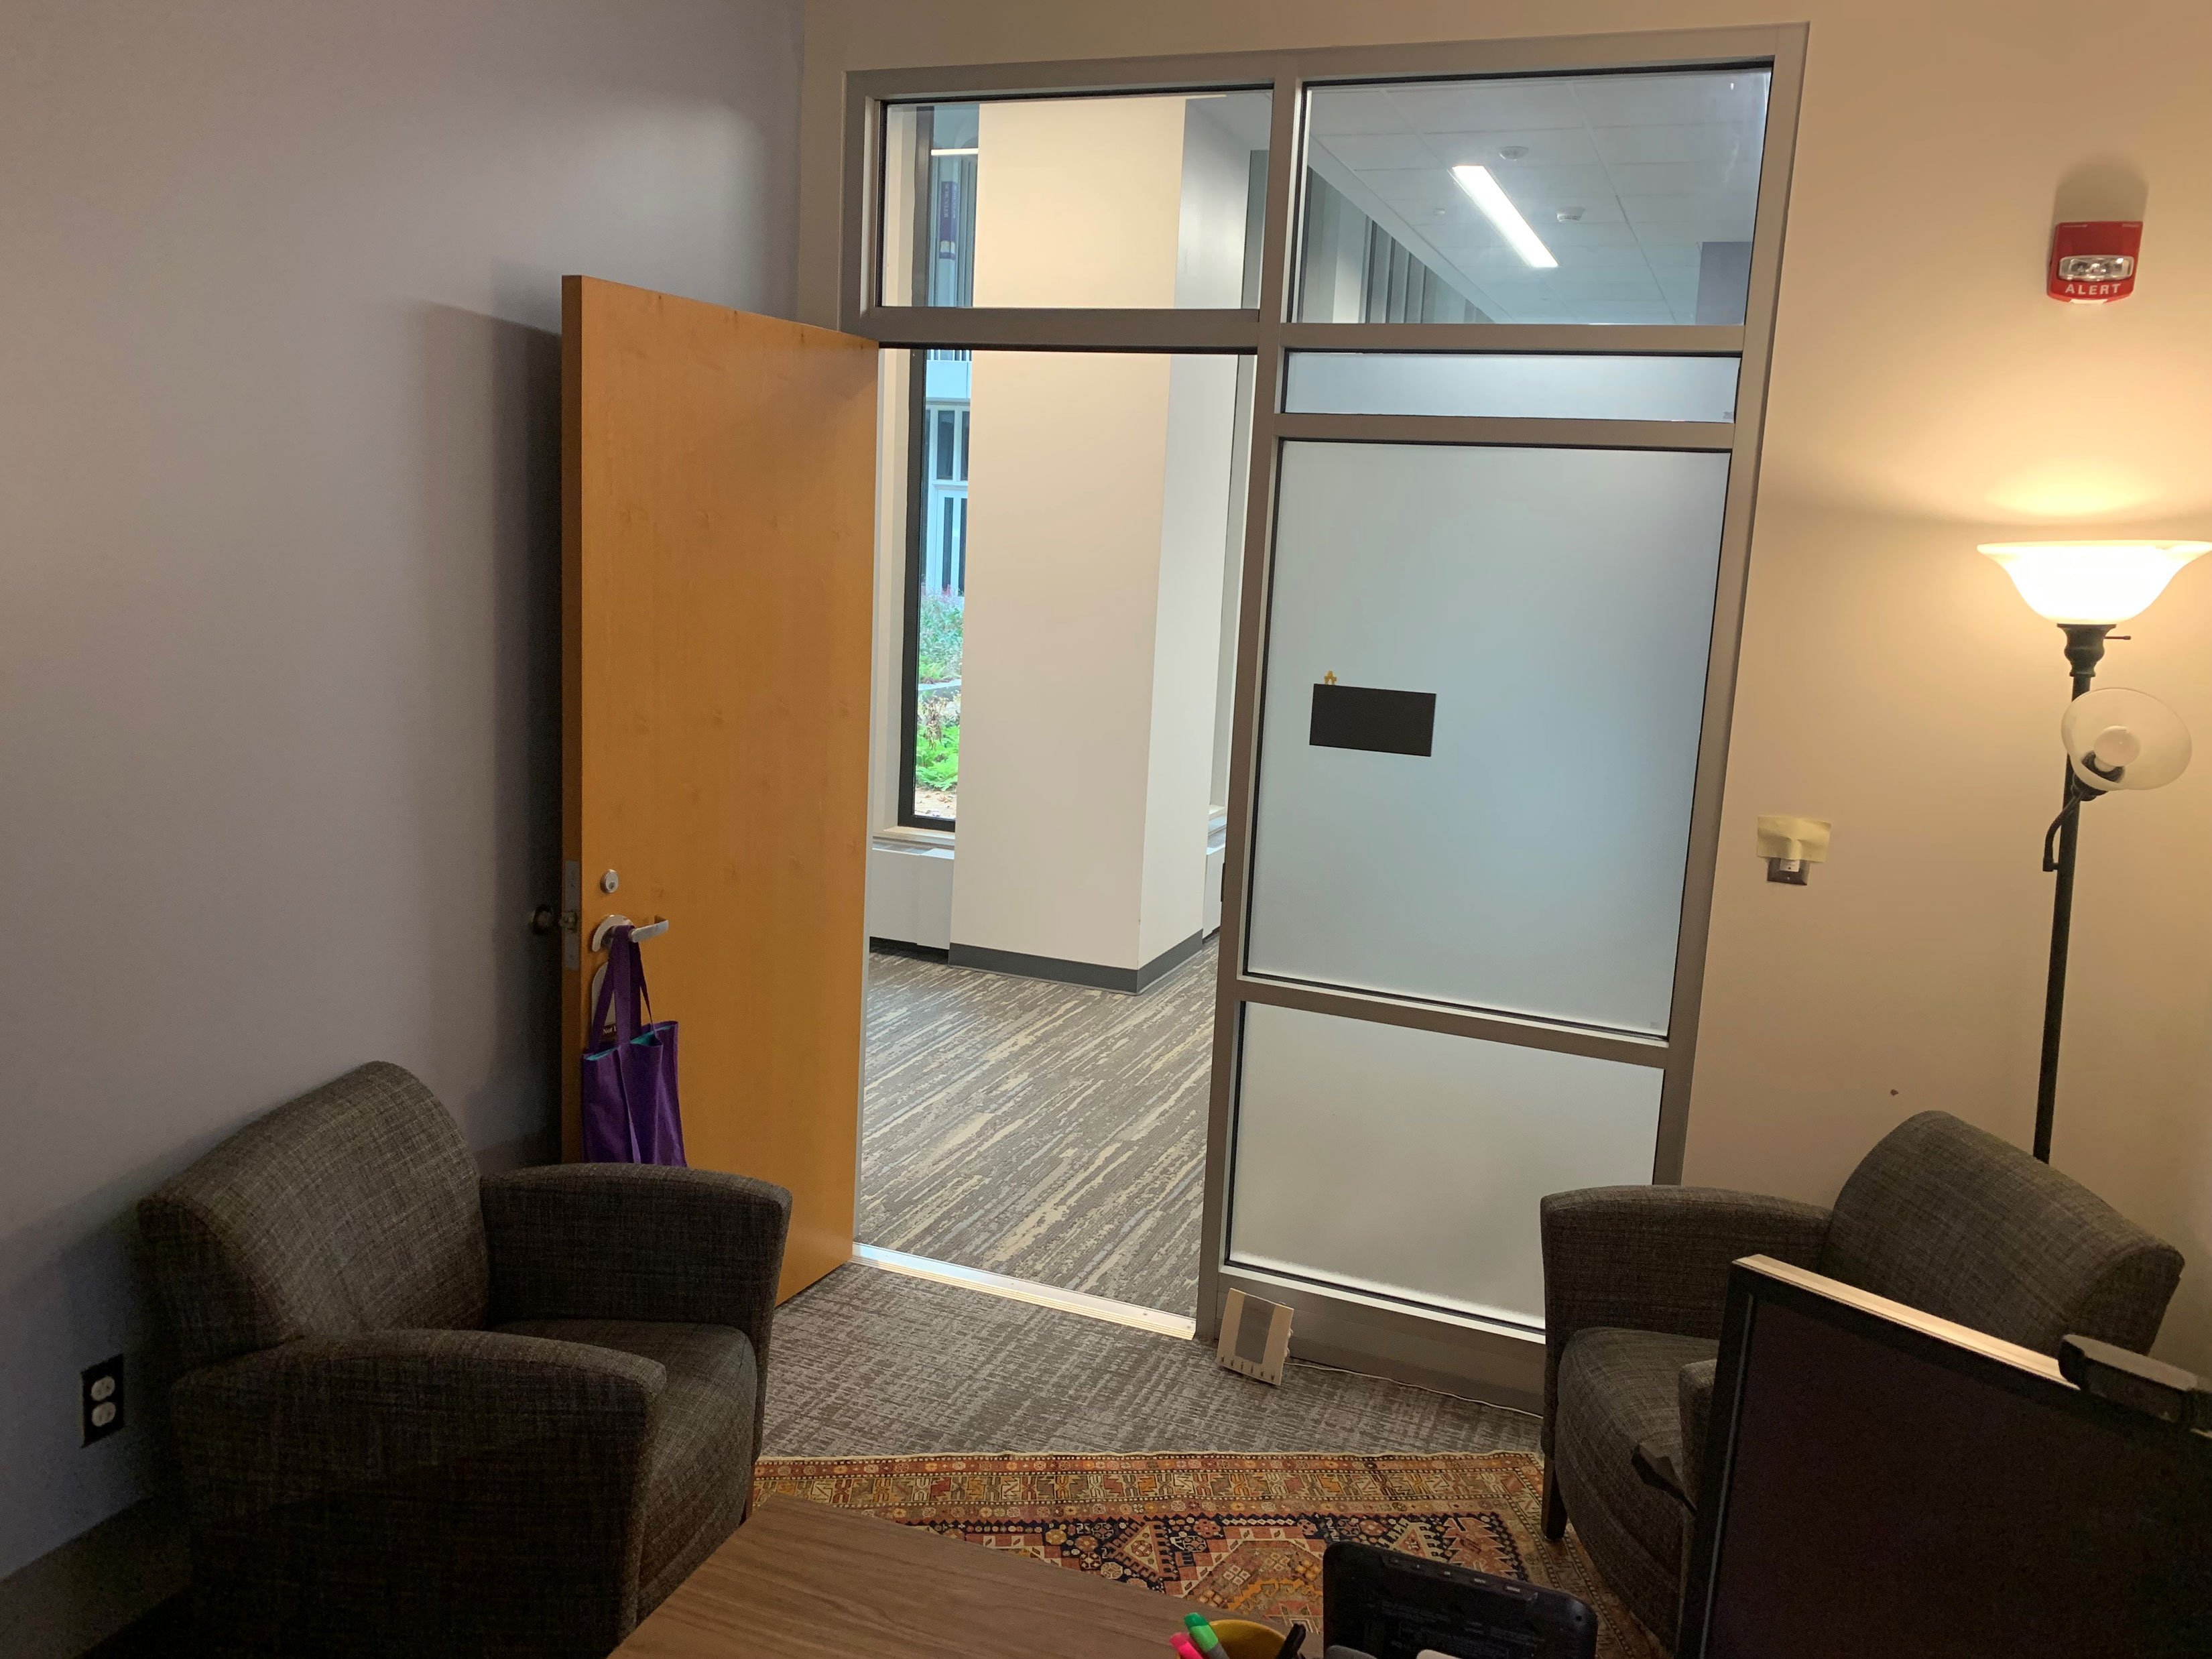 The view of a hallway from inside an office. There are two gray arm chairs and a stand light inside the office, and a door open to a hallway beyond.